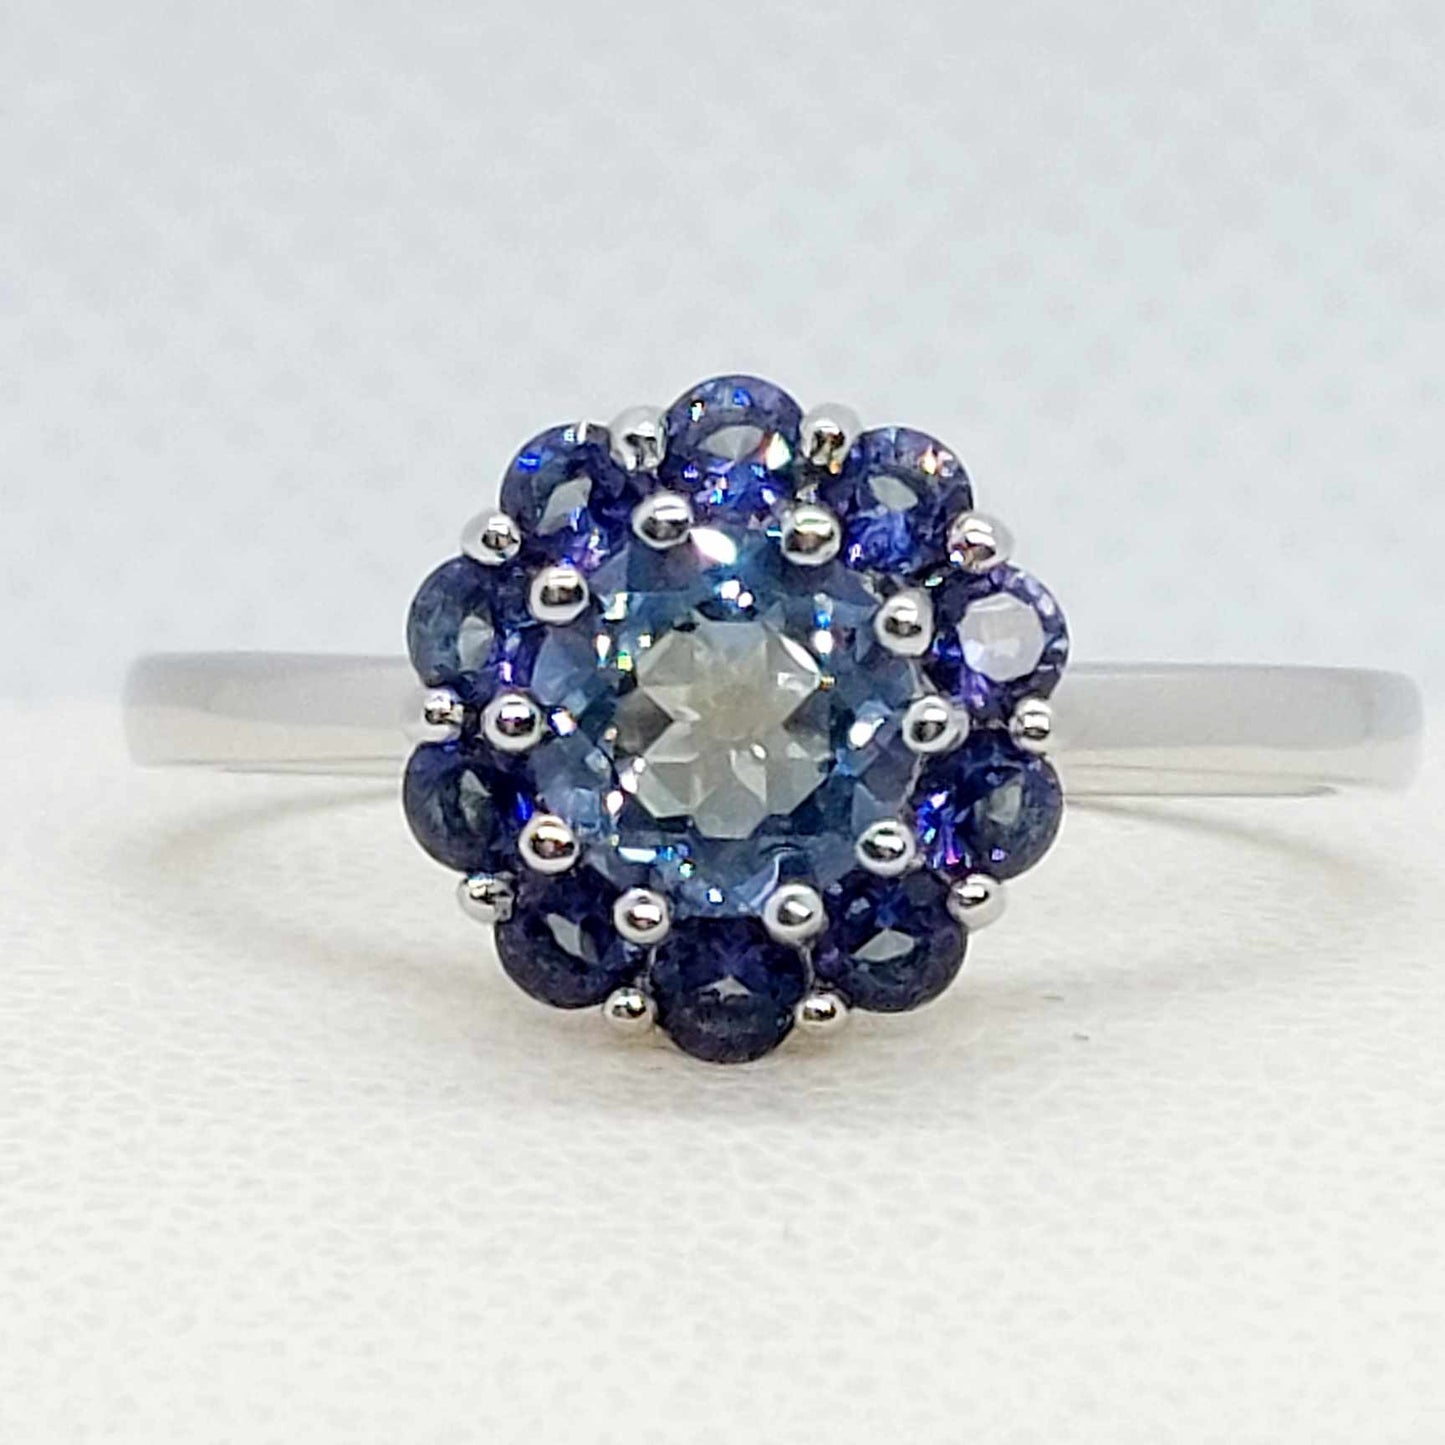 Natural Blue Mystic Quartz Ring in Sterling Silver